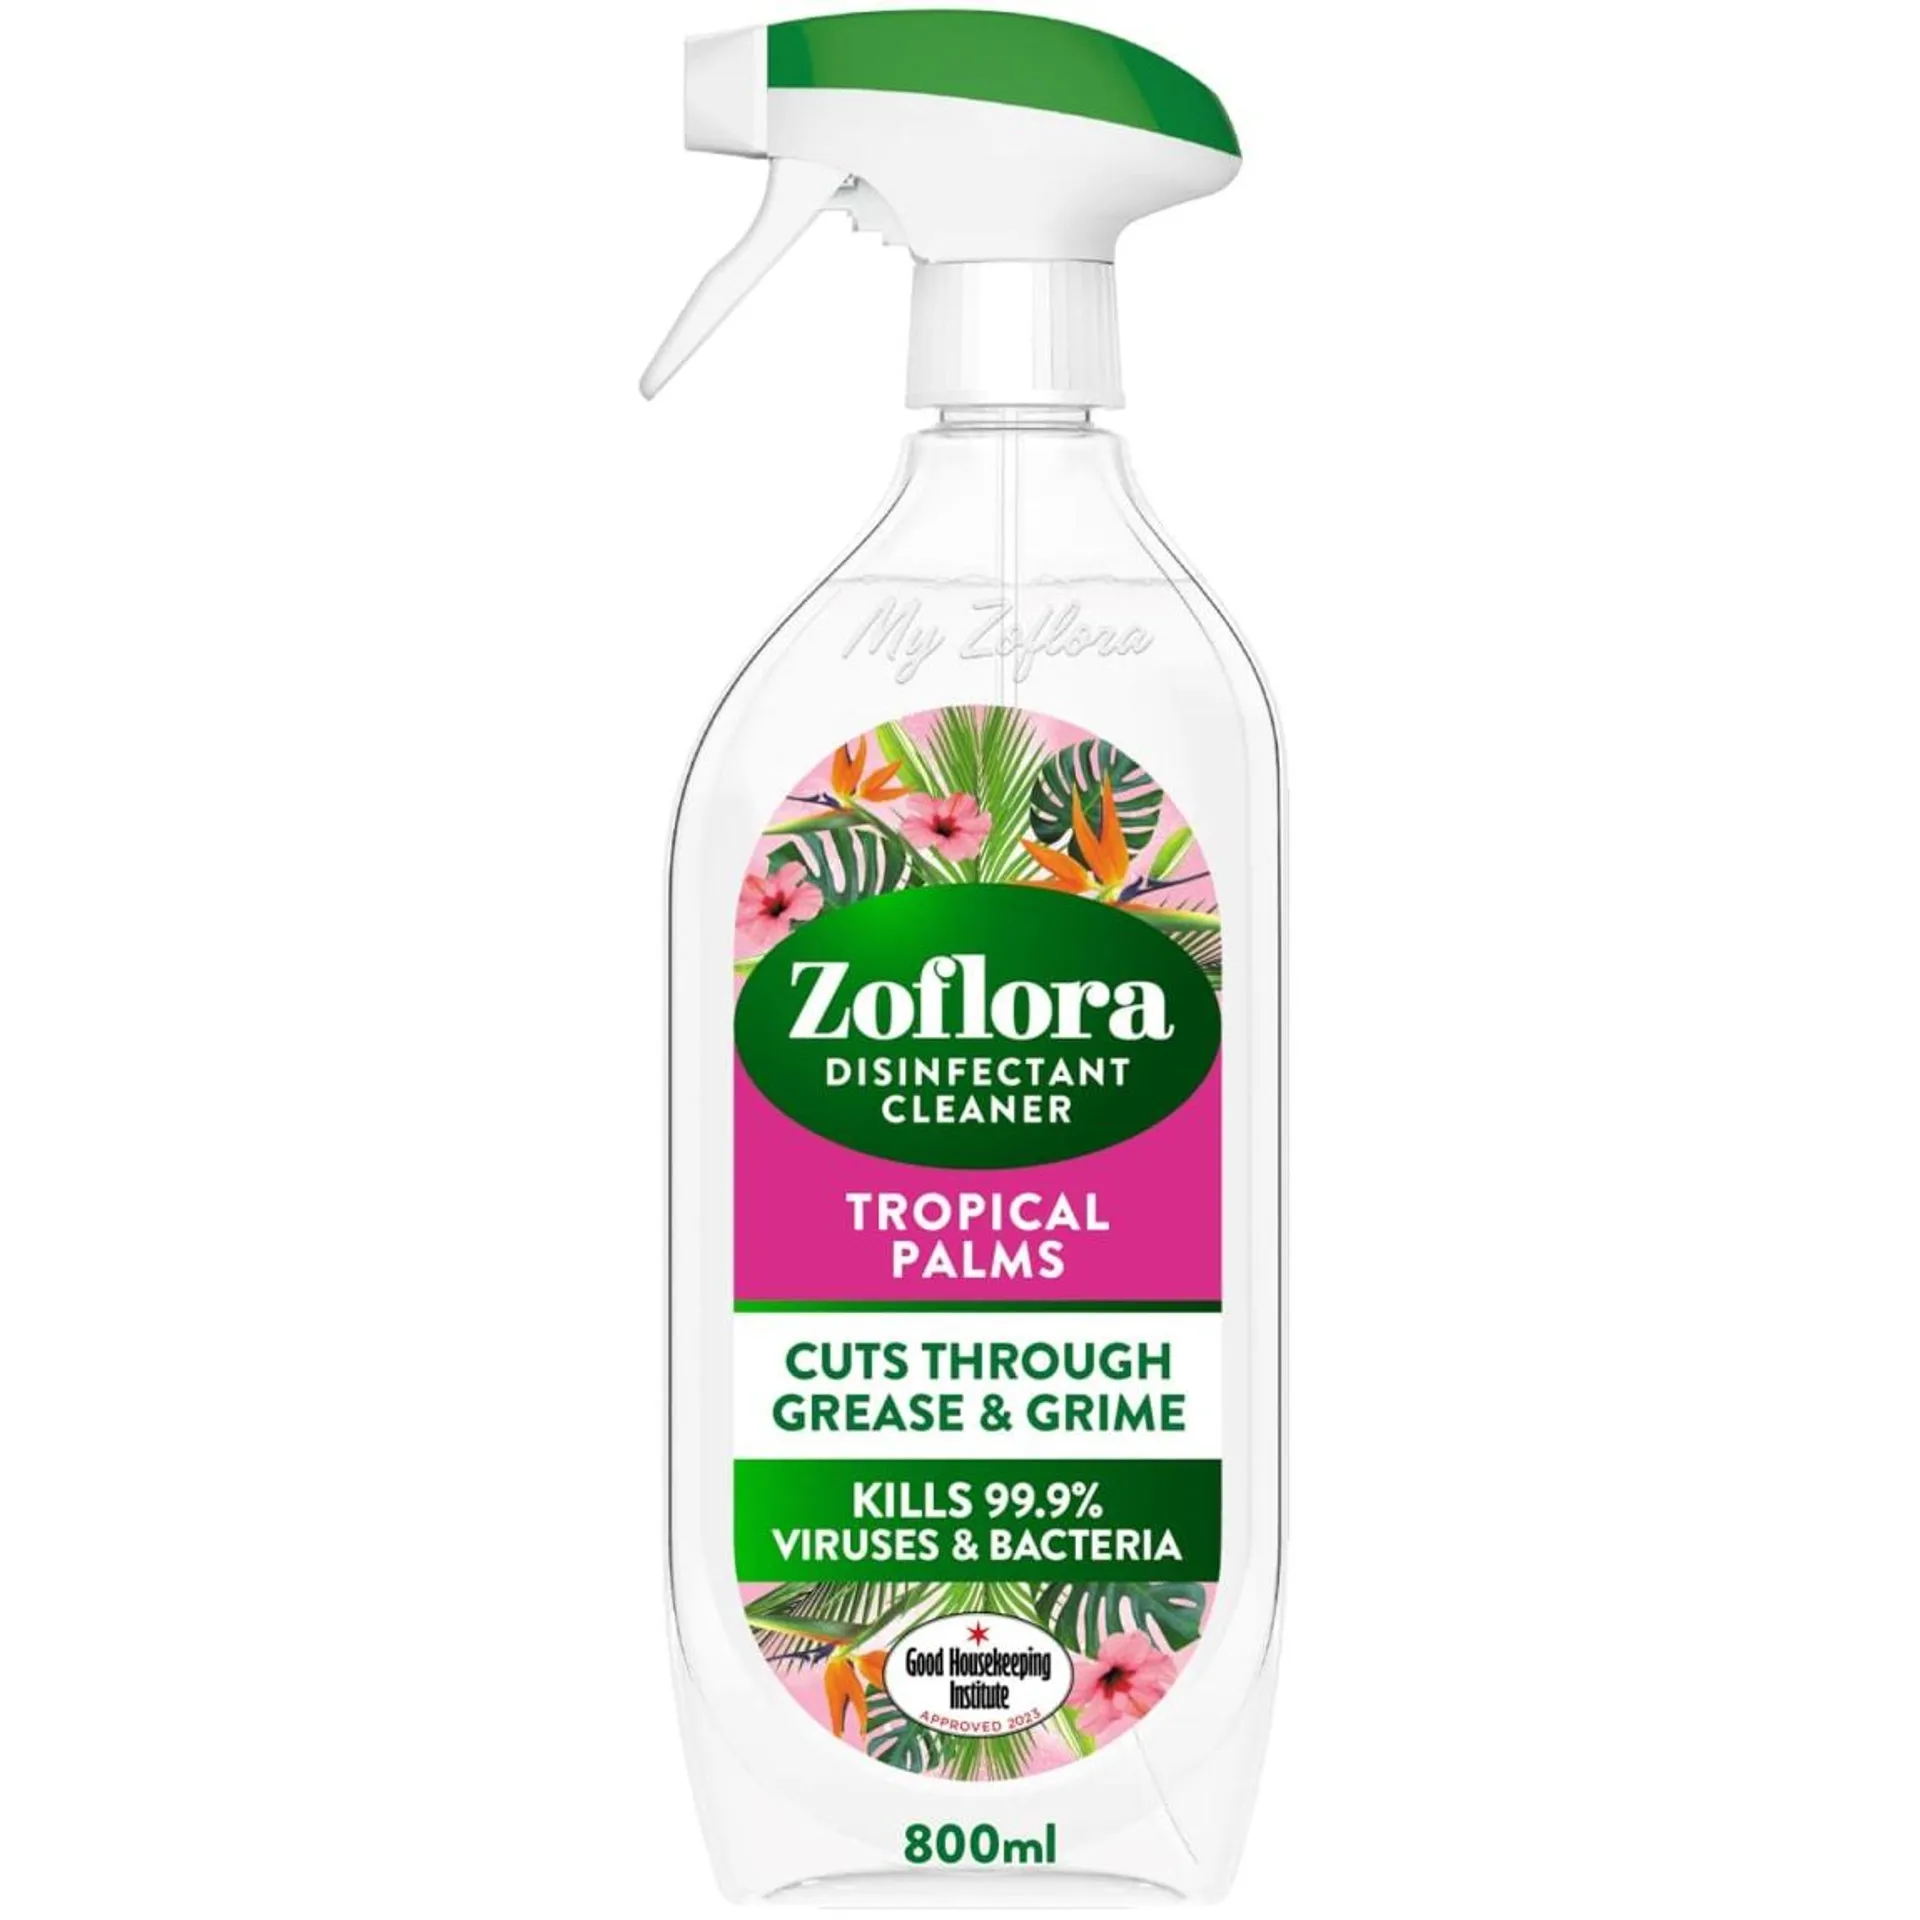 Zoflora Disinfectant Cleaner 800ml - Tropical Palms